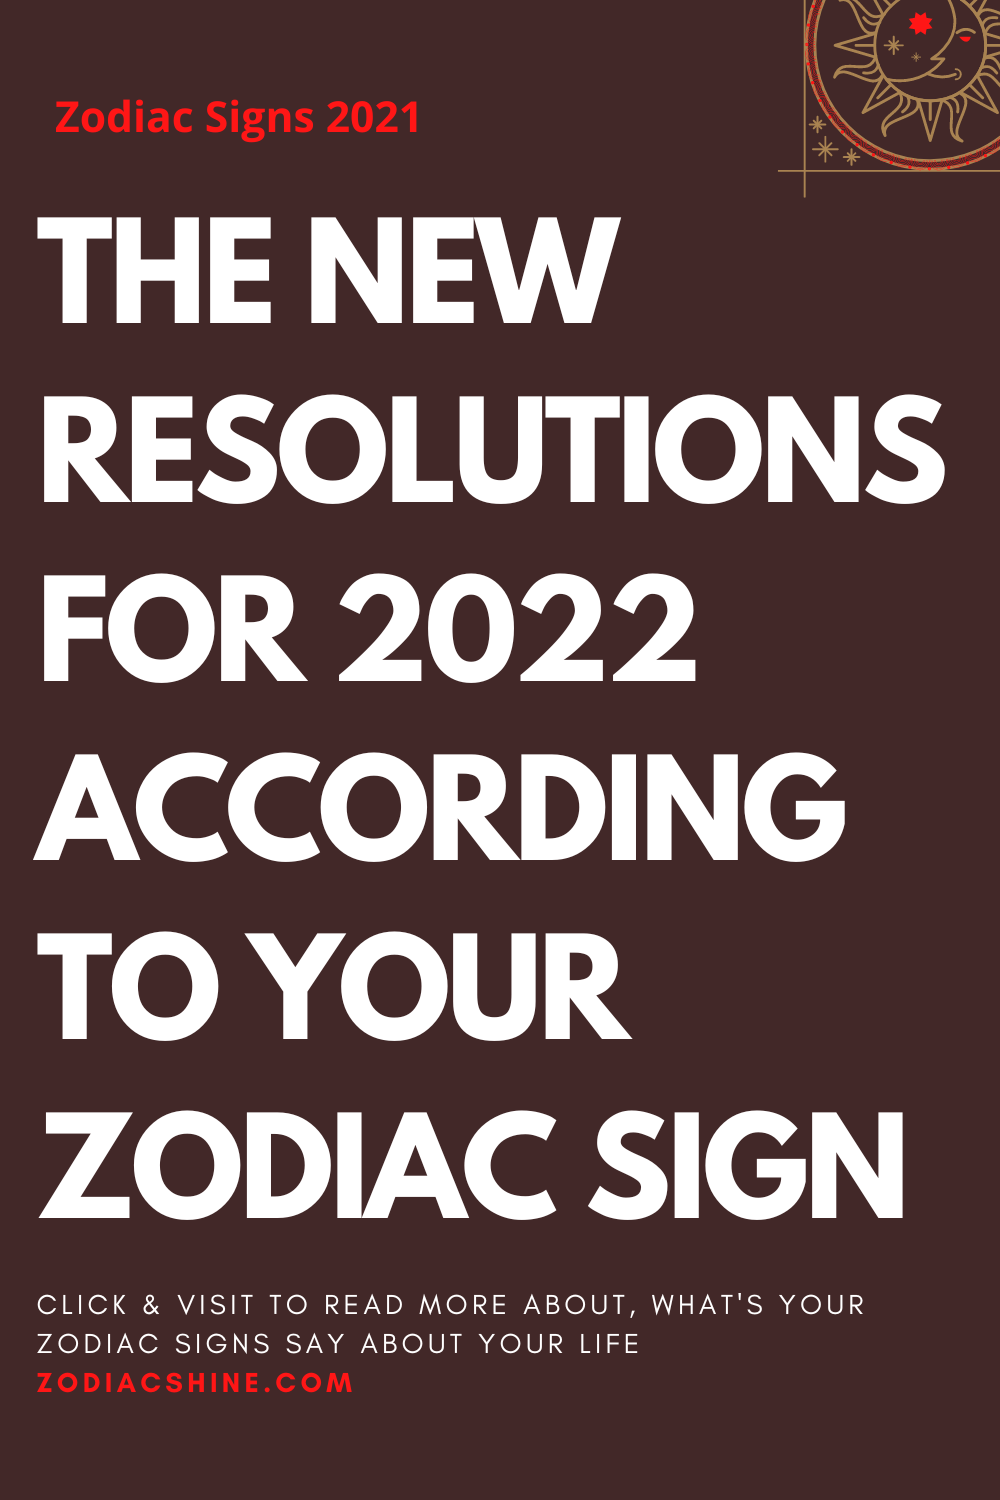 THE NEW RESOLUTIONS FOR 2022 ACCORDING TO YOUR ZODIAC SIGN